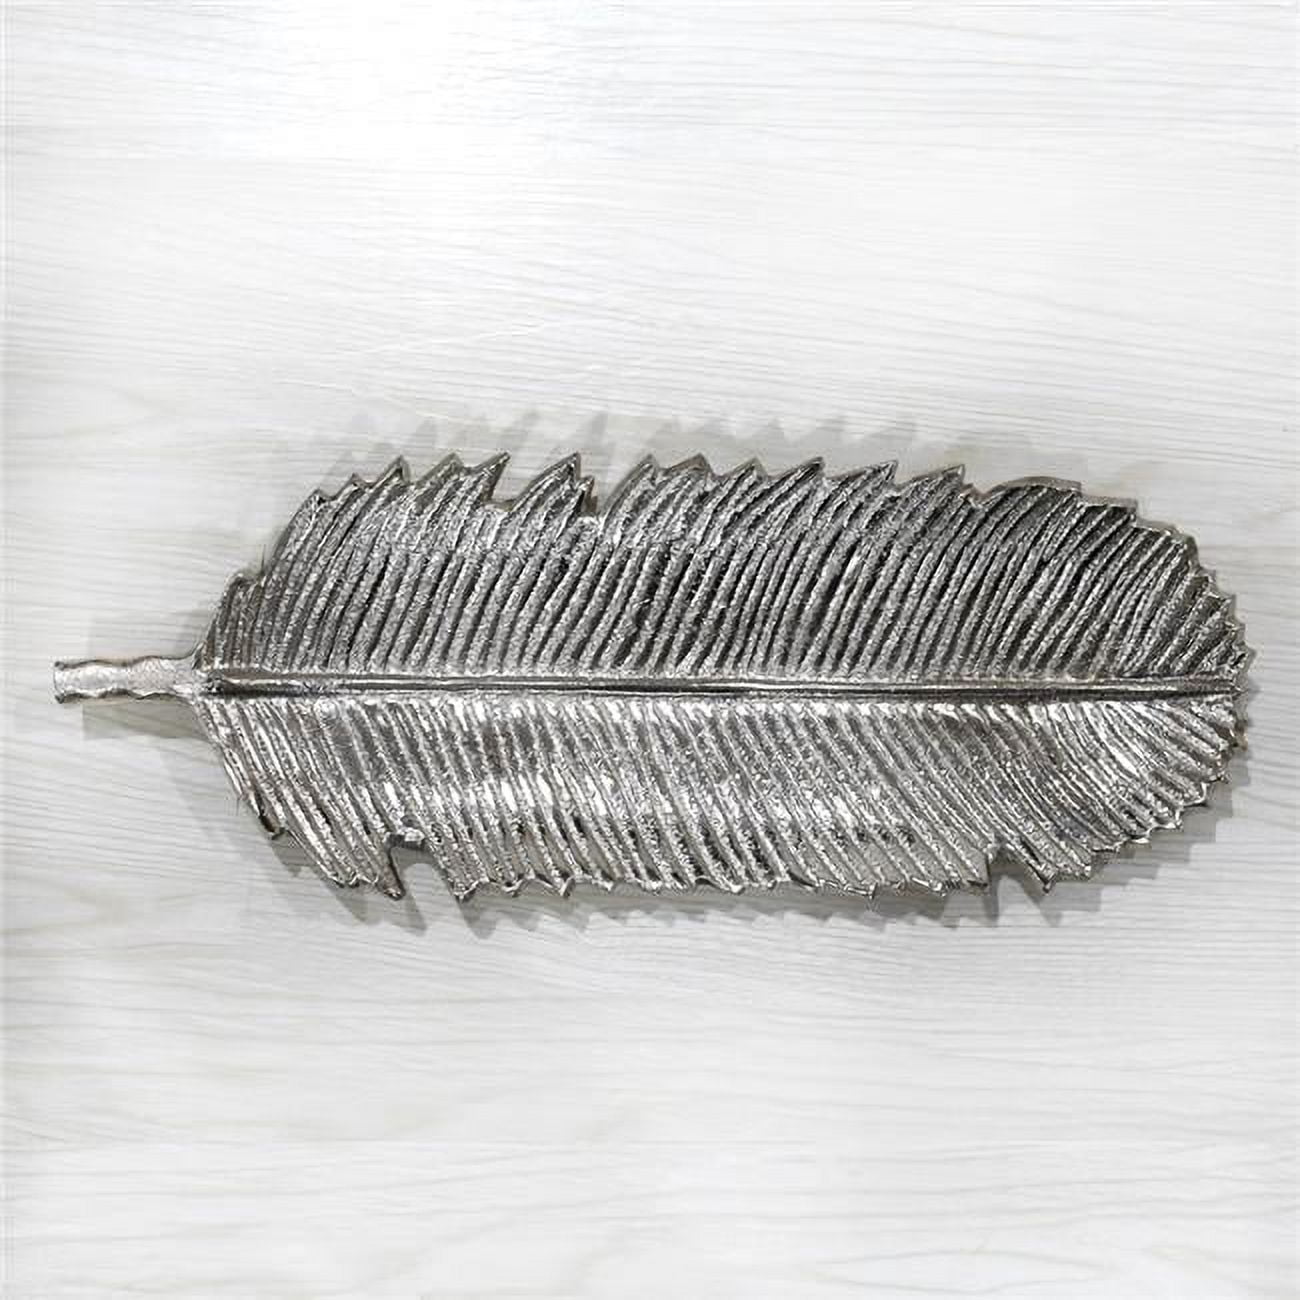 Picture of BBH Homes UBBBVK035AB2020ASC1HS 17.99 x 6.29 x 1.18 in. Handmade Silver Coated Decorative Aluminum Tray